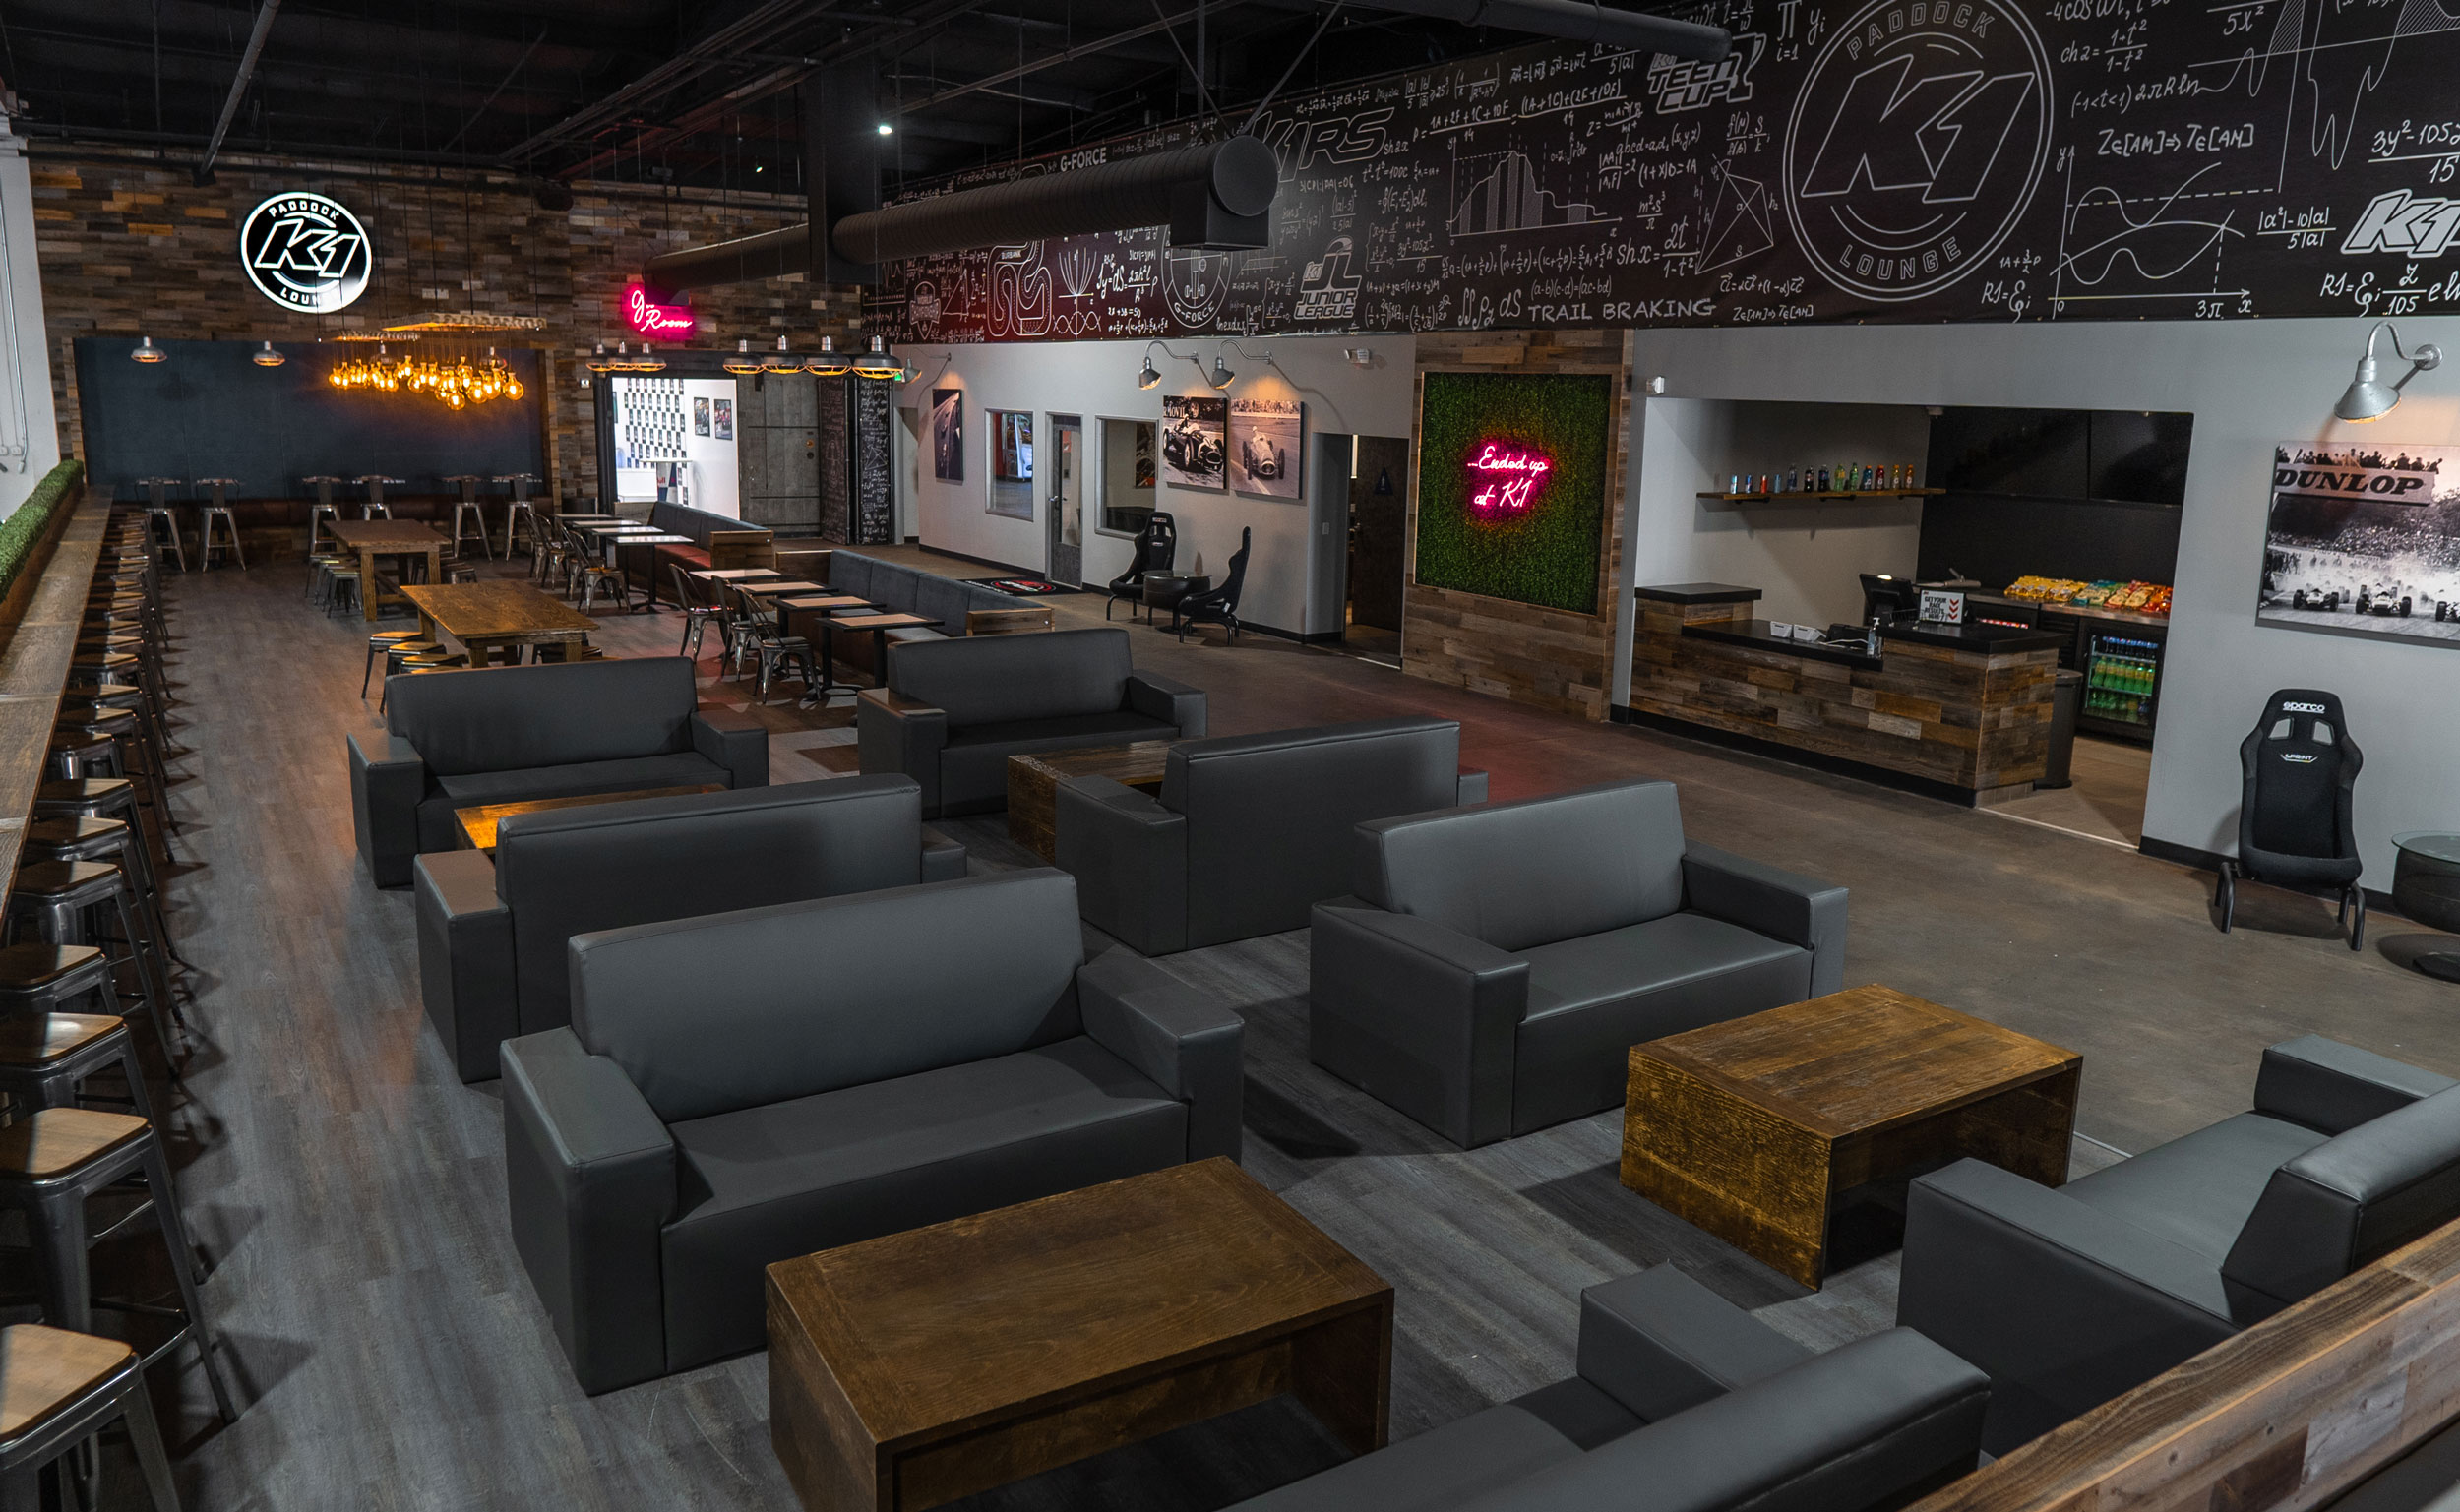 The upscale Paddock Lounge and Lobby inside K1 Speed Burbank offers plenty of seating trackside in a sophisticated environment that features leather couches.